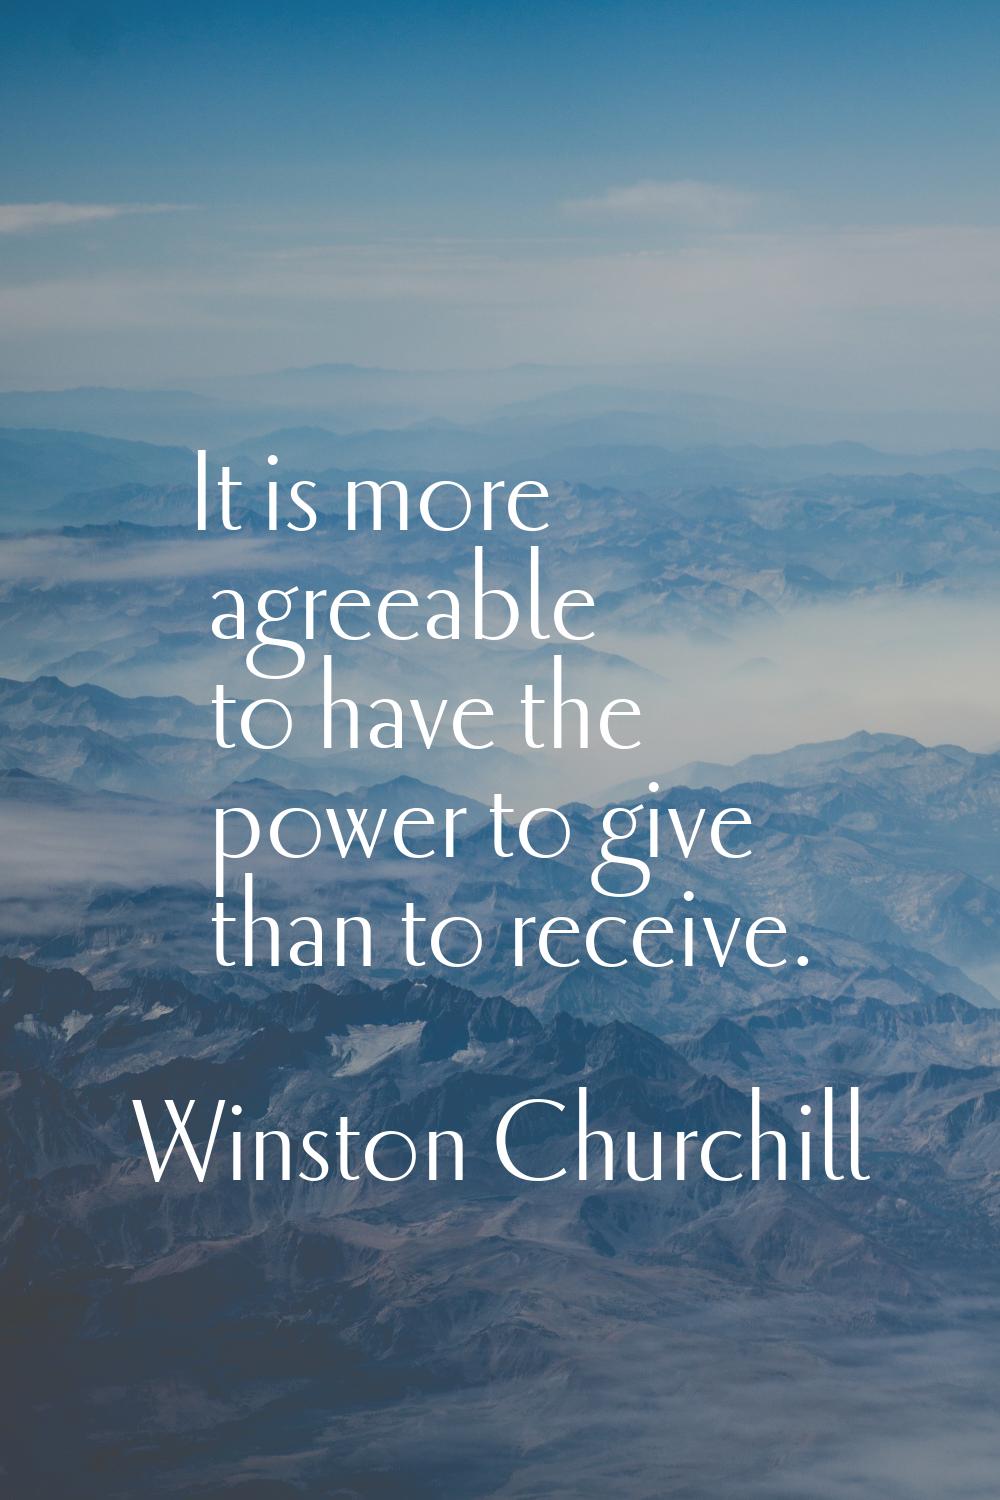 It is more agreeable to have the power to give than to receive.